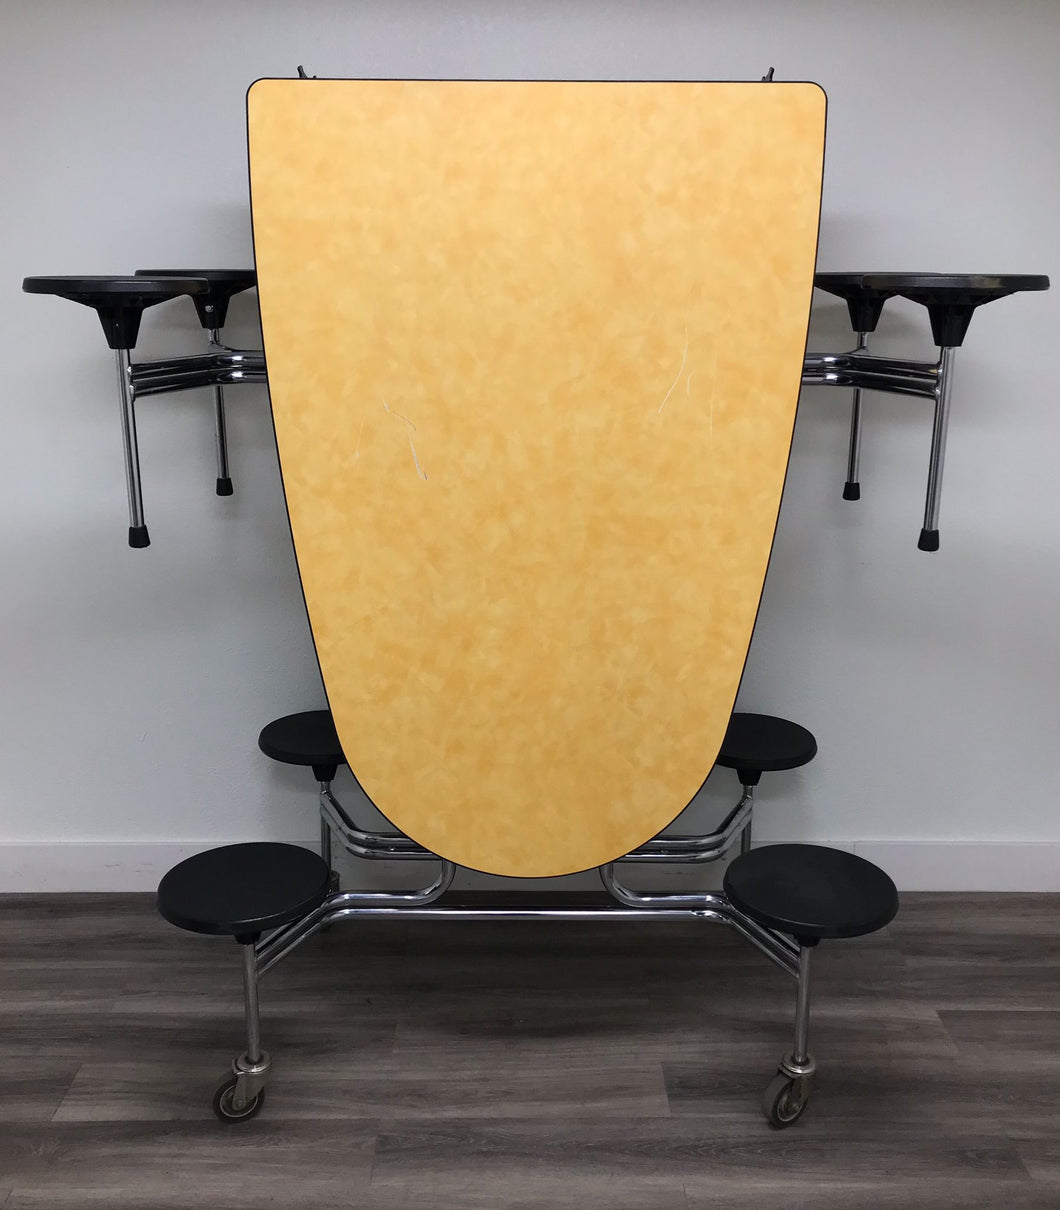 Wheeelchair Accessible 10ft Cafeteria Lunch Table w/ 8 Stool Seat, Yellow Top, Black Seat, Oval, Adult Size (RF)